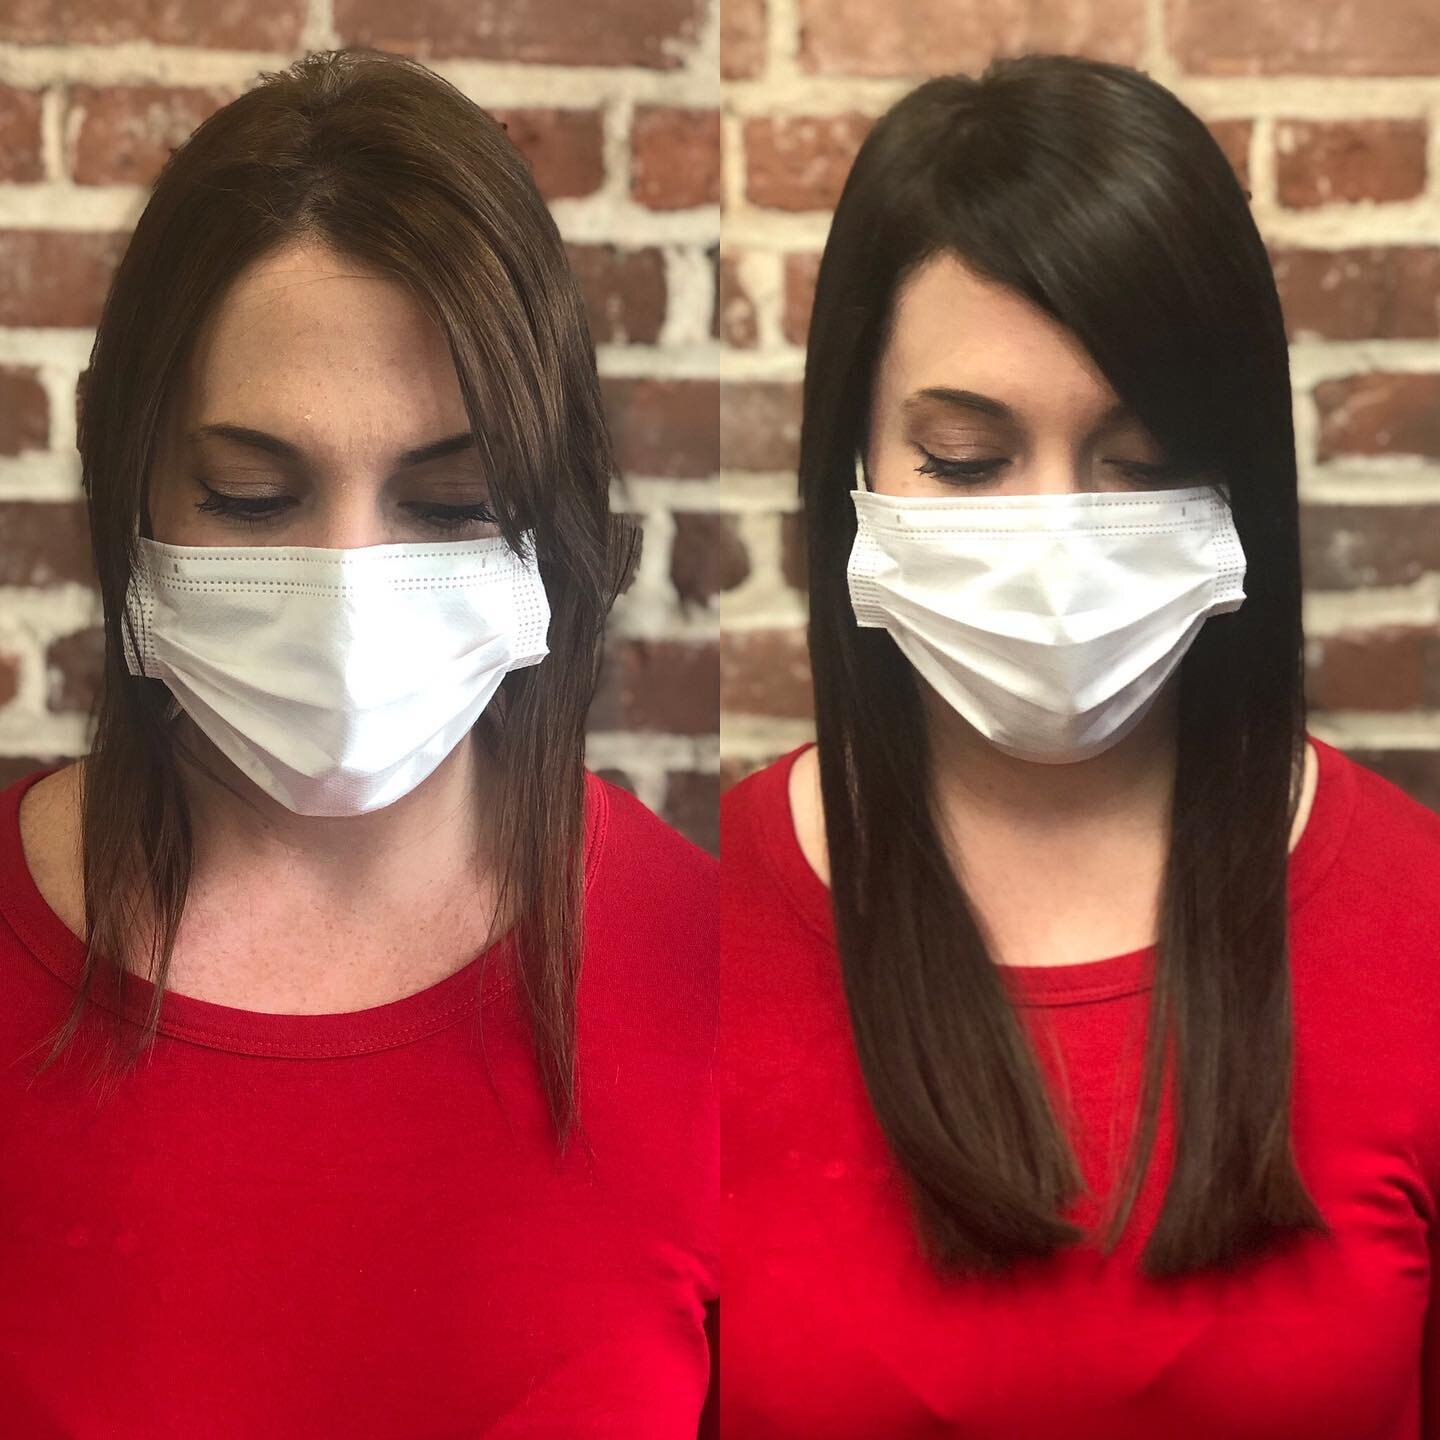 Swipe for more angles! What a difference some @greatlengthsusa hair extensions and a new color can do for your self confidence. We added 14inches of @greatlengthsusa tapes to the lovely lady for a very merry Christmas 🎄